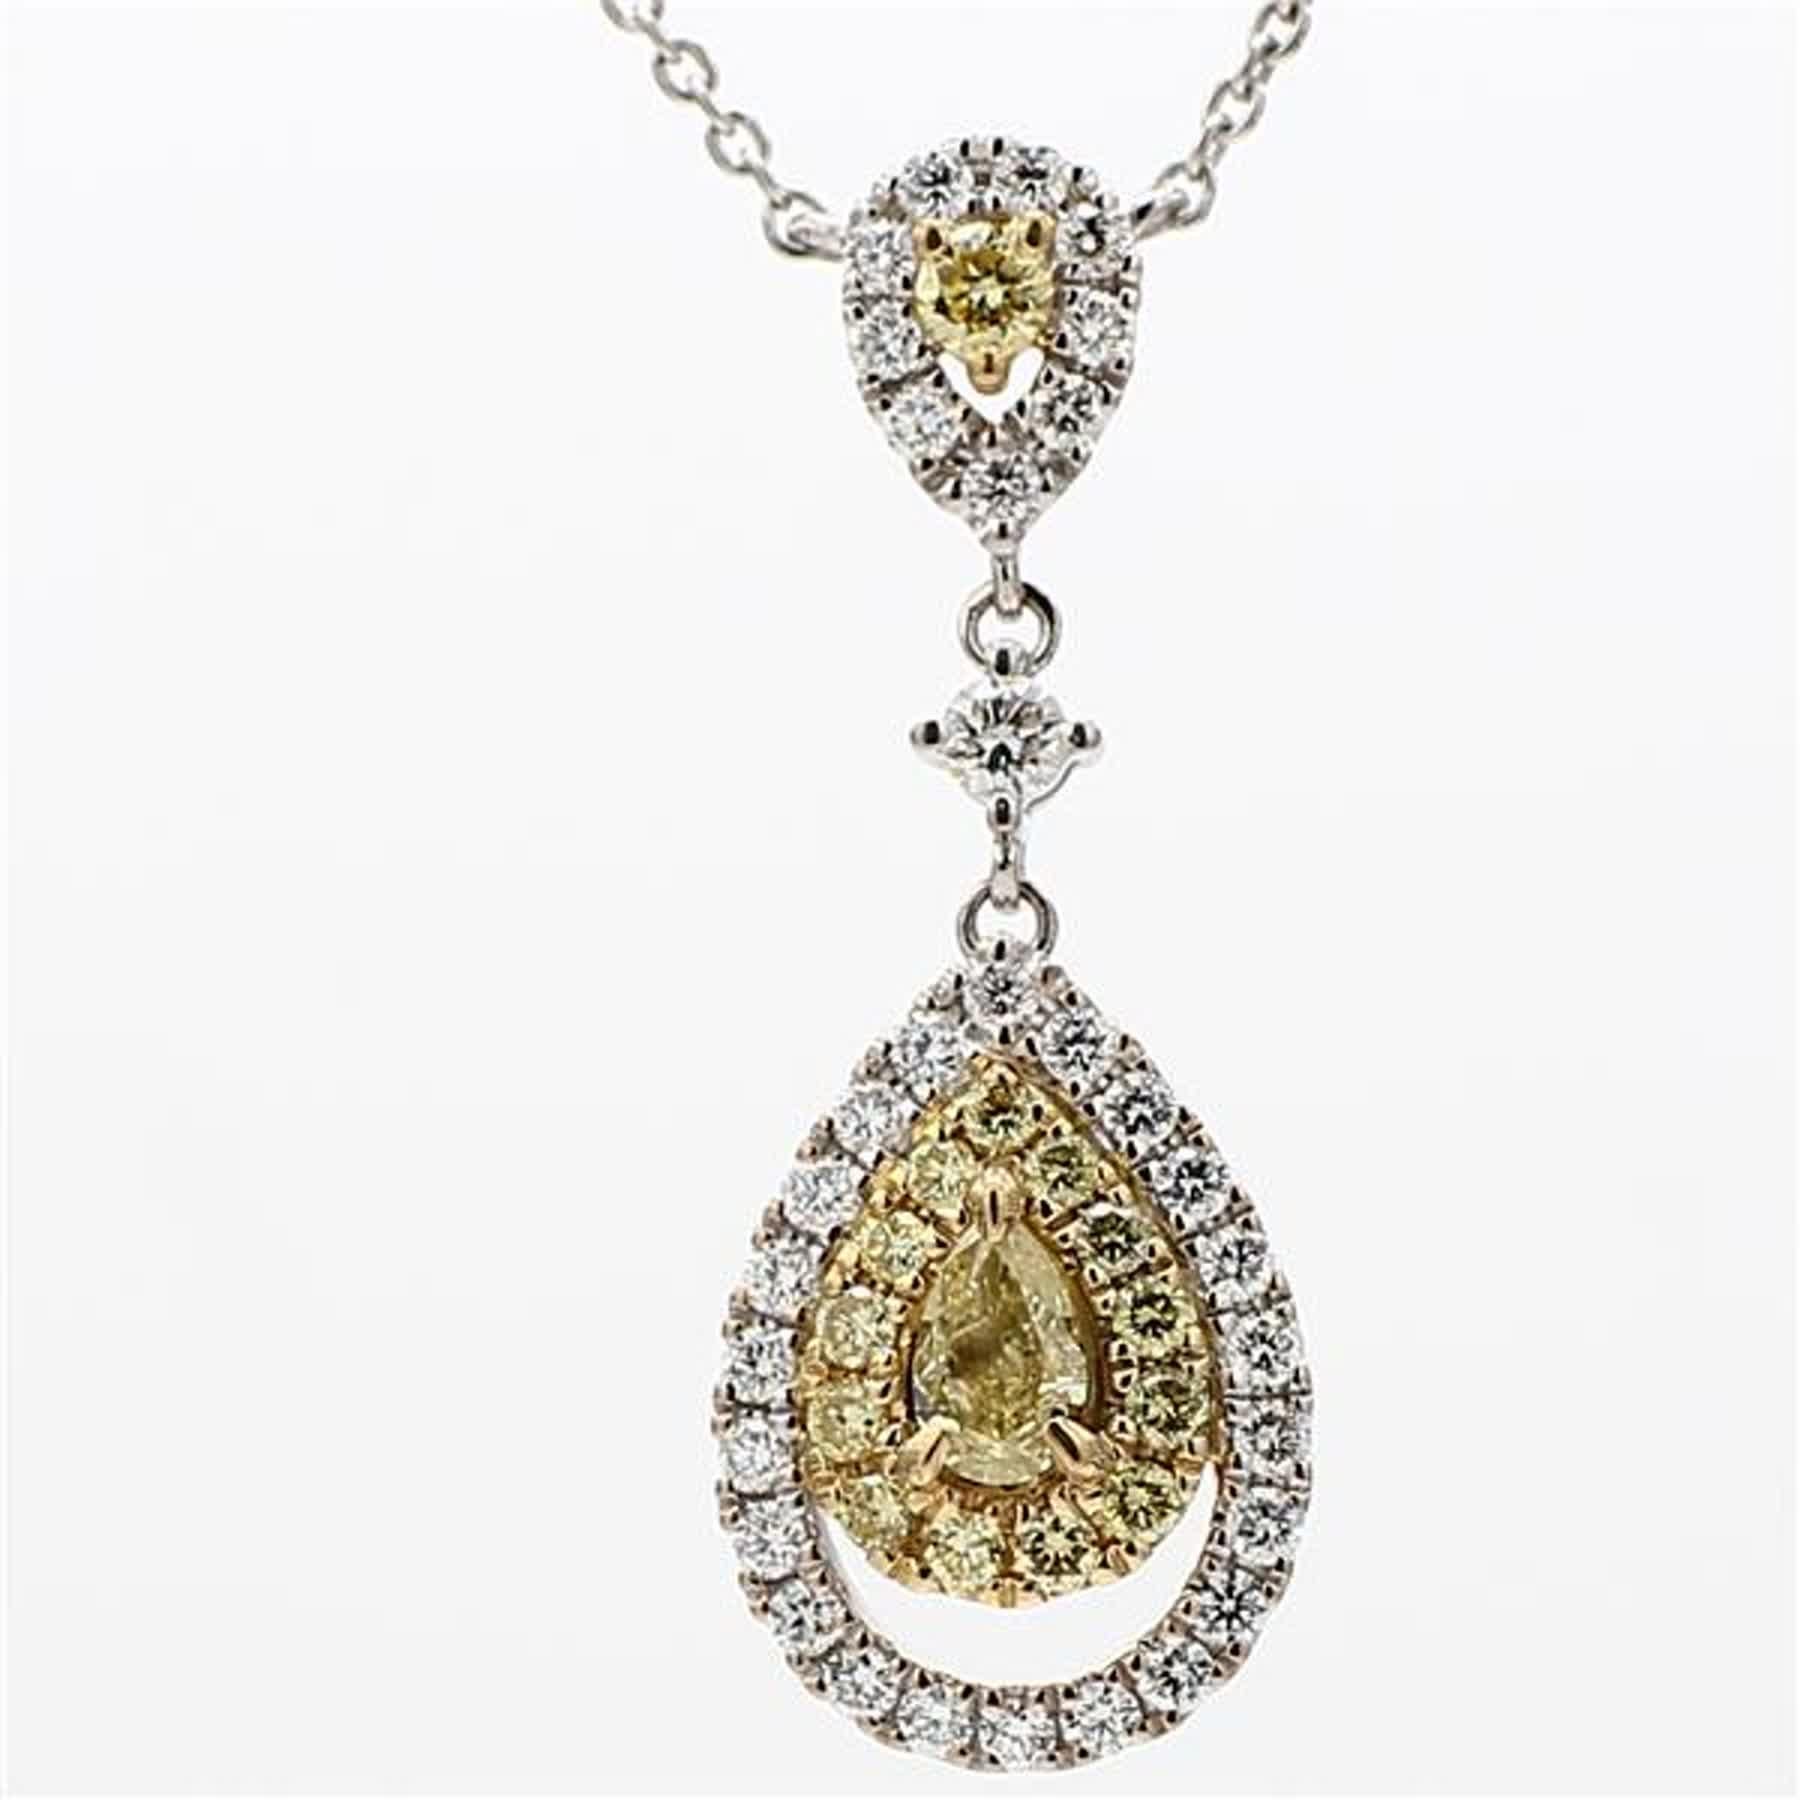 RareGemWorld's classic diamond necklace. Mounted in a beautiful 18K Yellow and White Gold setting with a natural pear cut yellow diamond. The yellow diamond is surrounded by round natural white diamond melee and round natural yellow diamond melee.